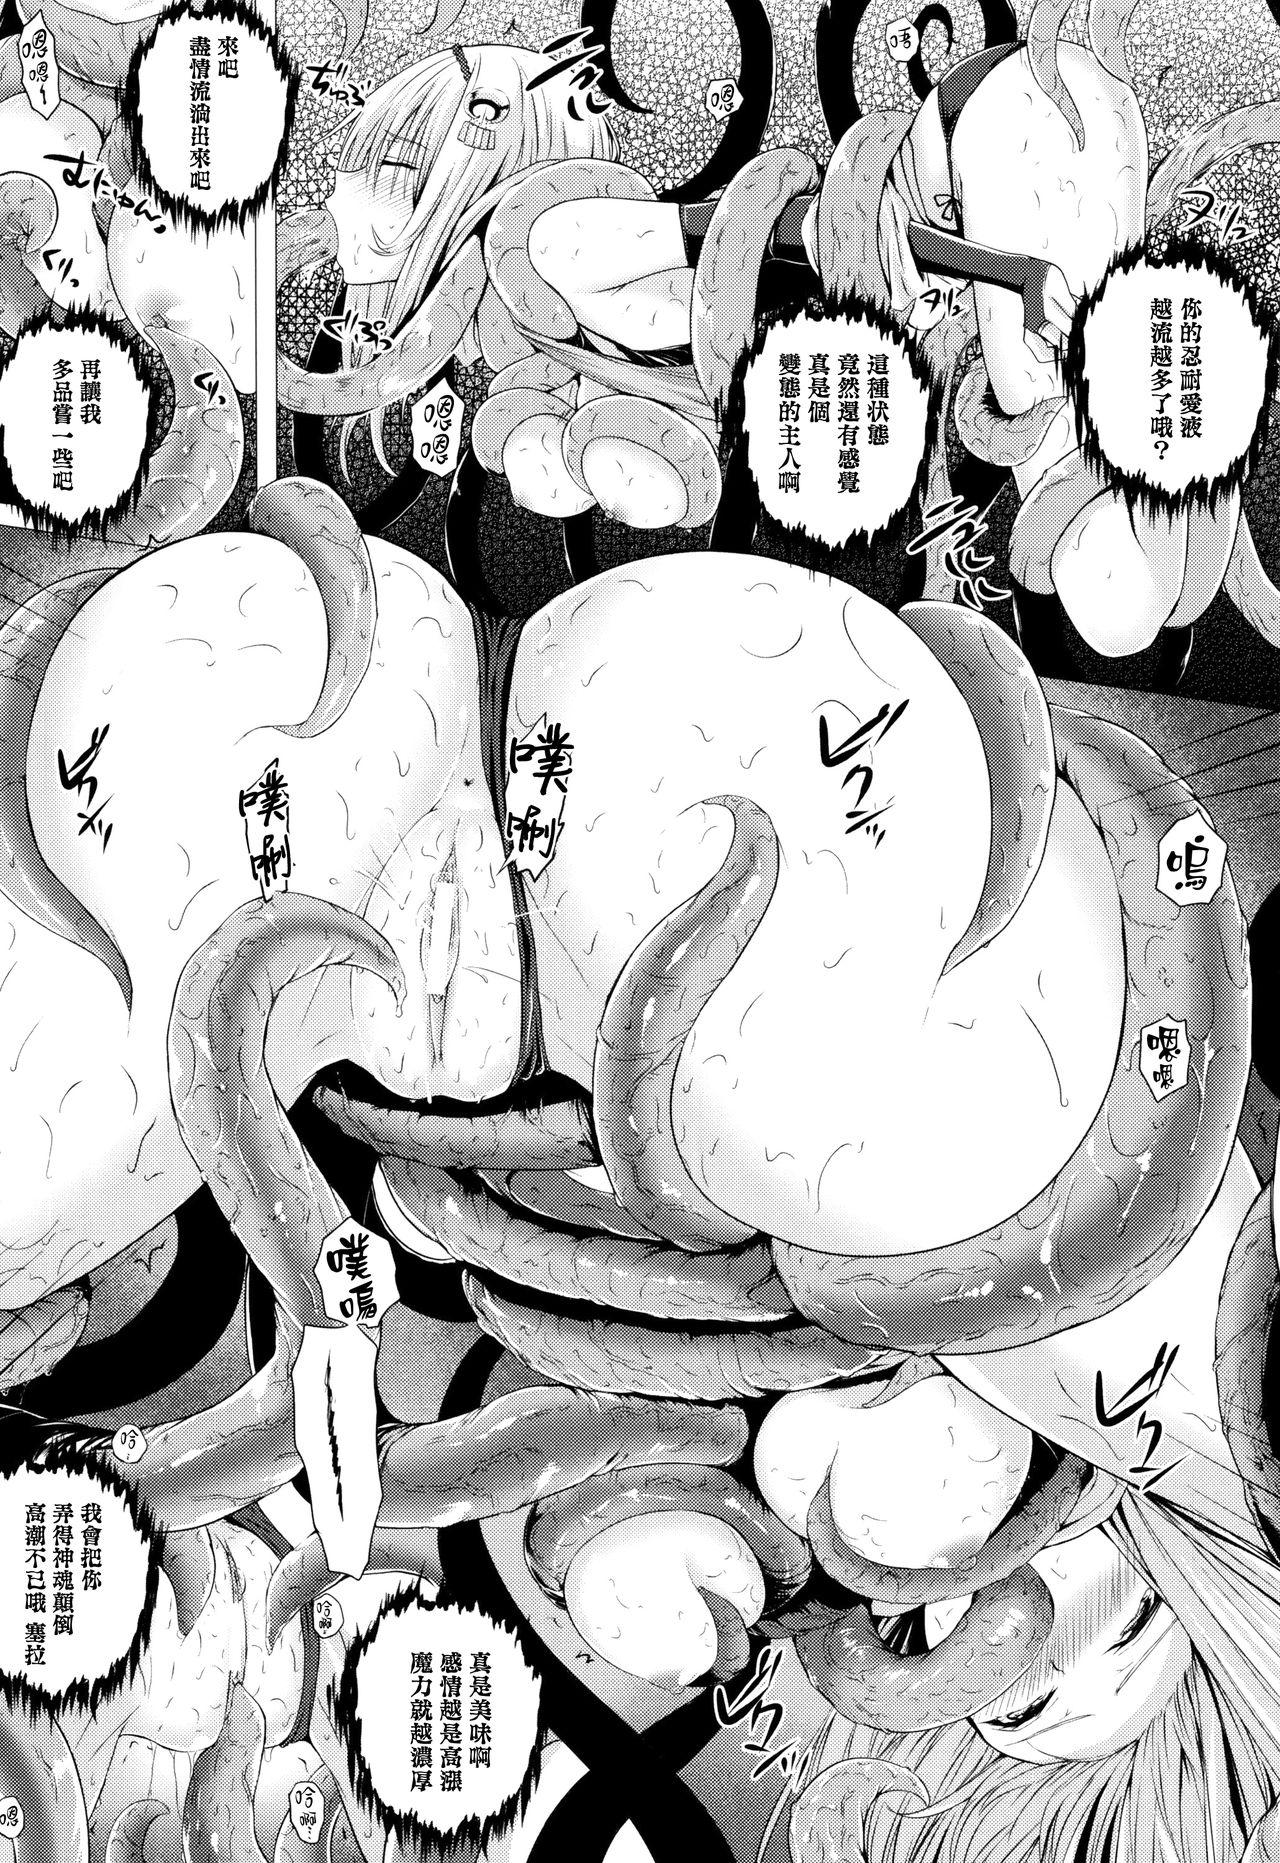 Porn Pussy Isekai no Mahoutsukai Ch.1-2 Picked Up - Page 3